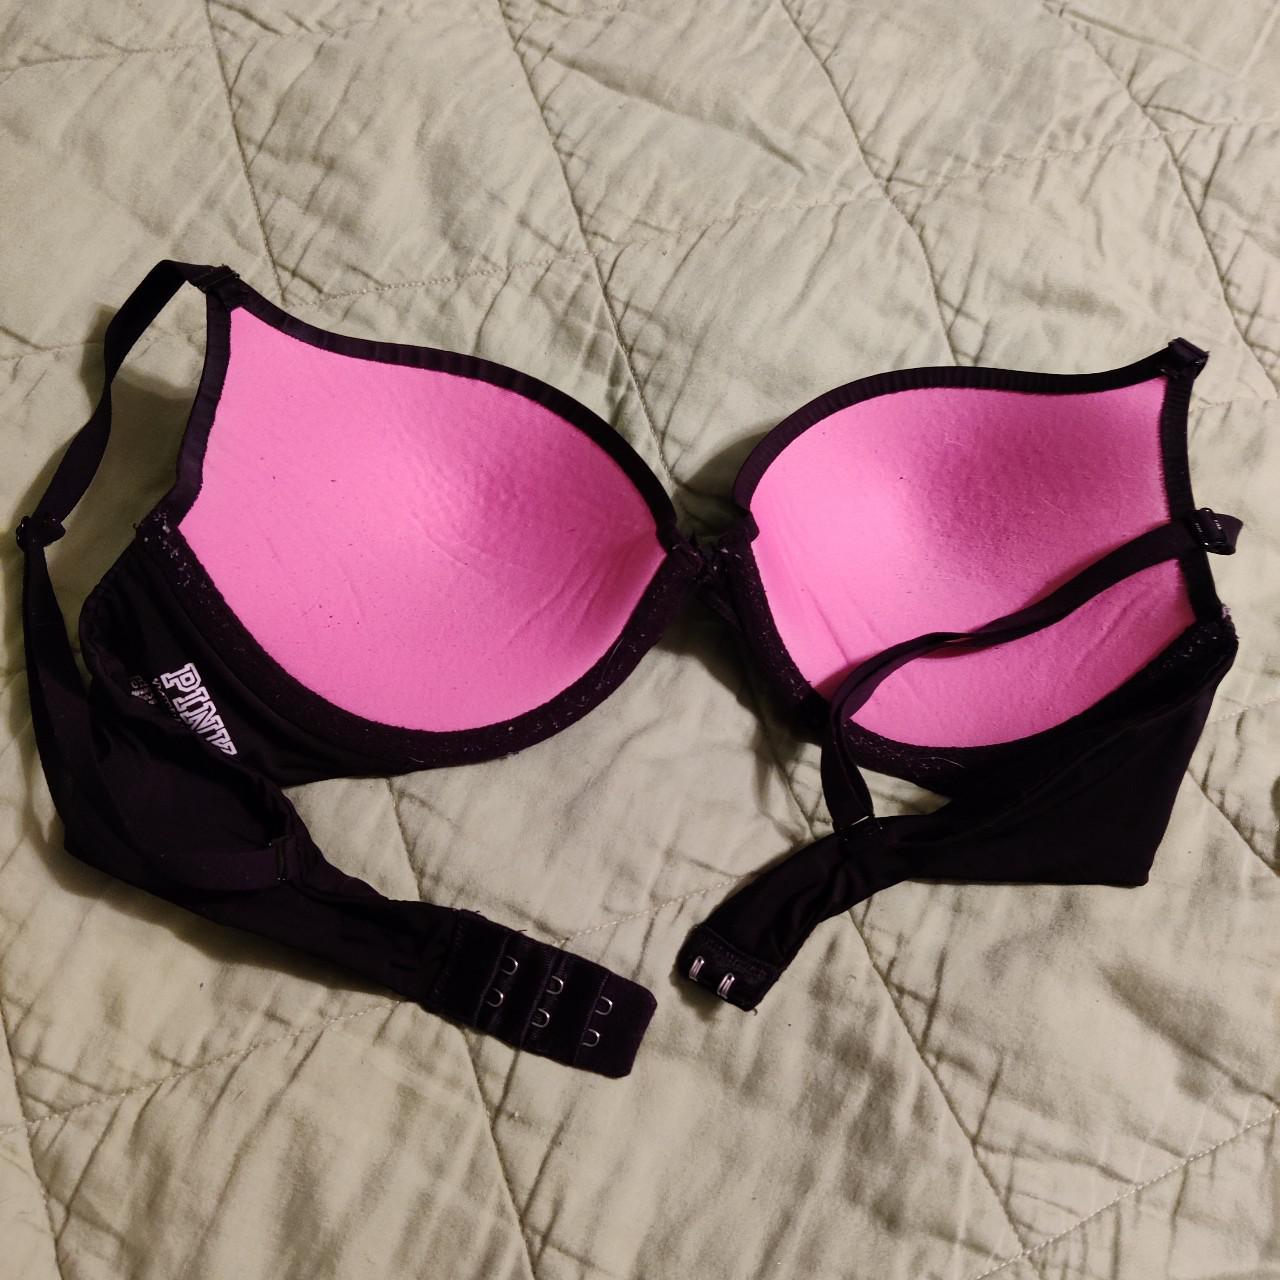 red PINK bra size 36B please see photos for flaws - Depop